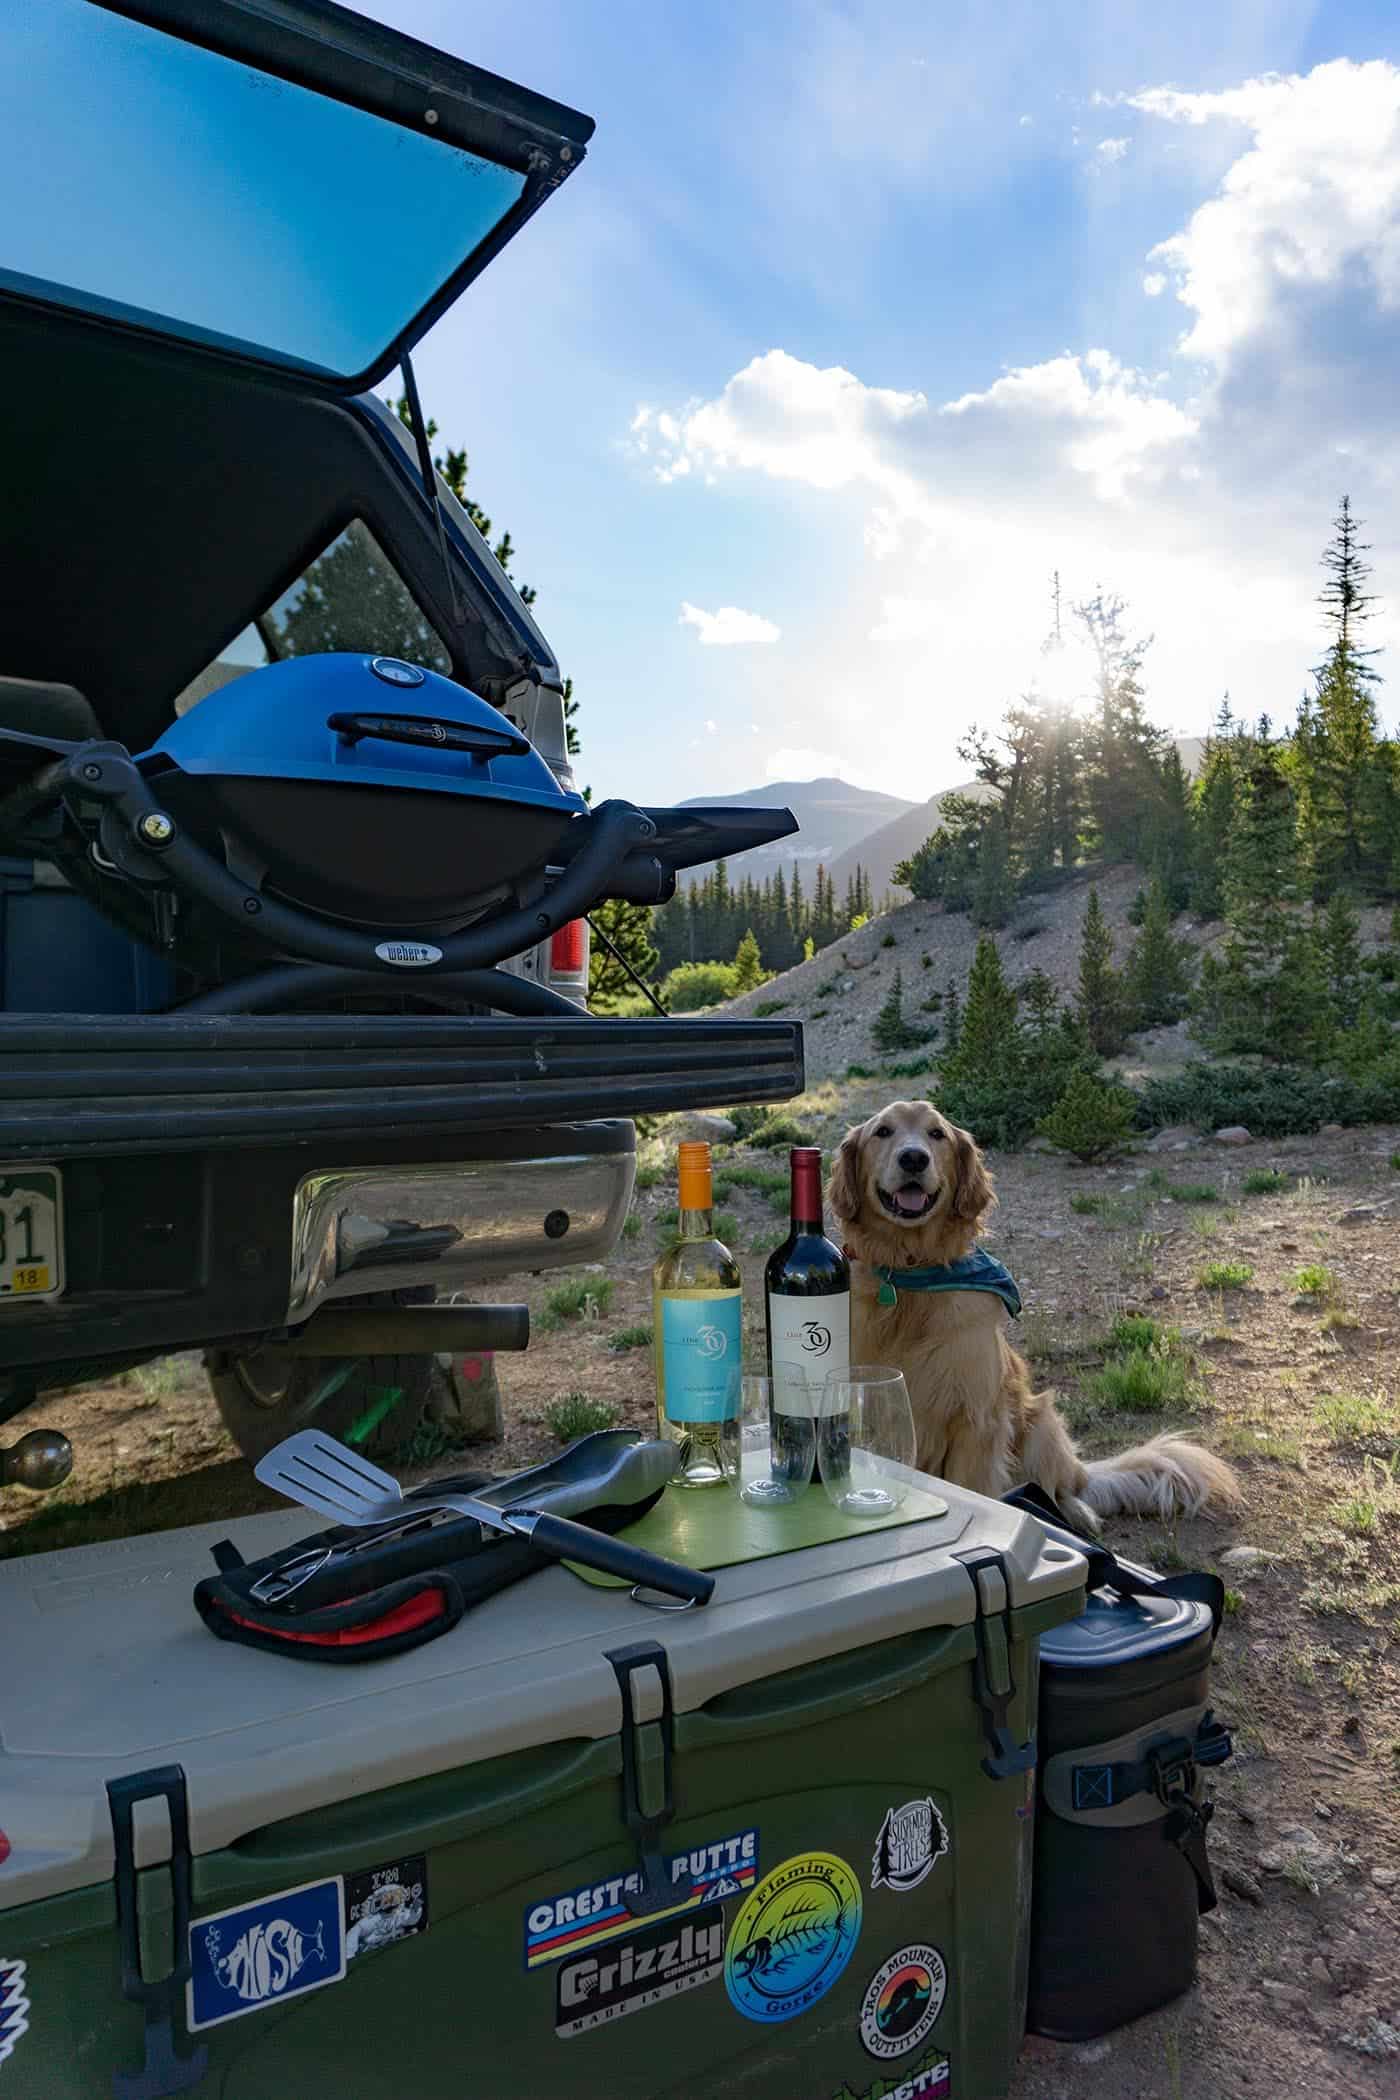 Four tips for car camping in comfort – Campsite with a view, Air mattress for a good night sleep, Line 39 wine and cheese for happy hour and a Weber® Grill for cooking dinner AD Msg 4 21+